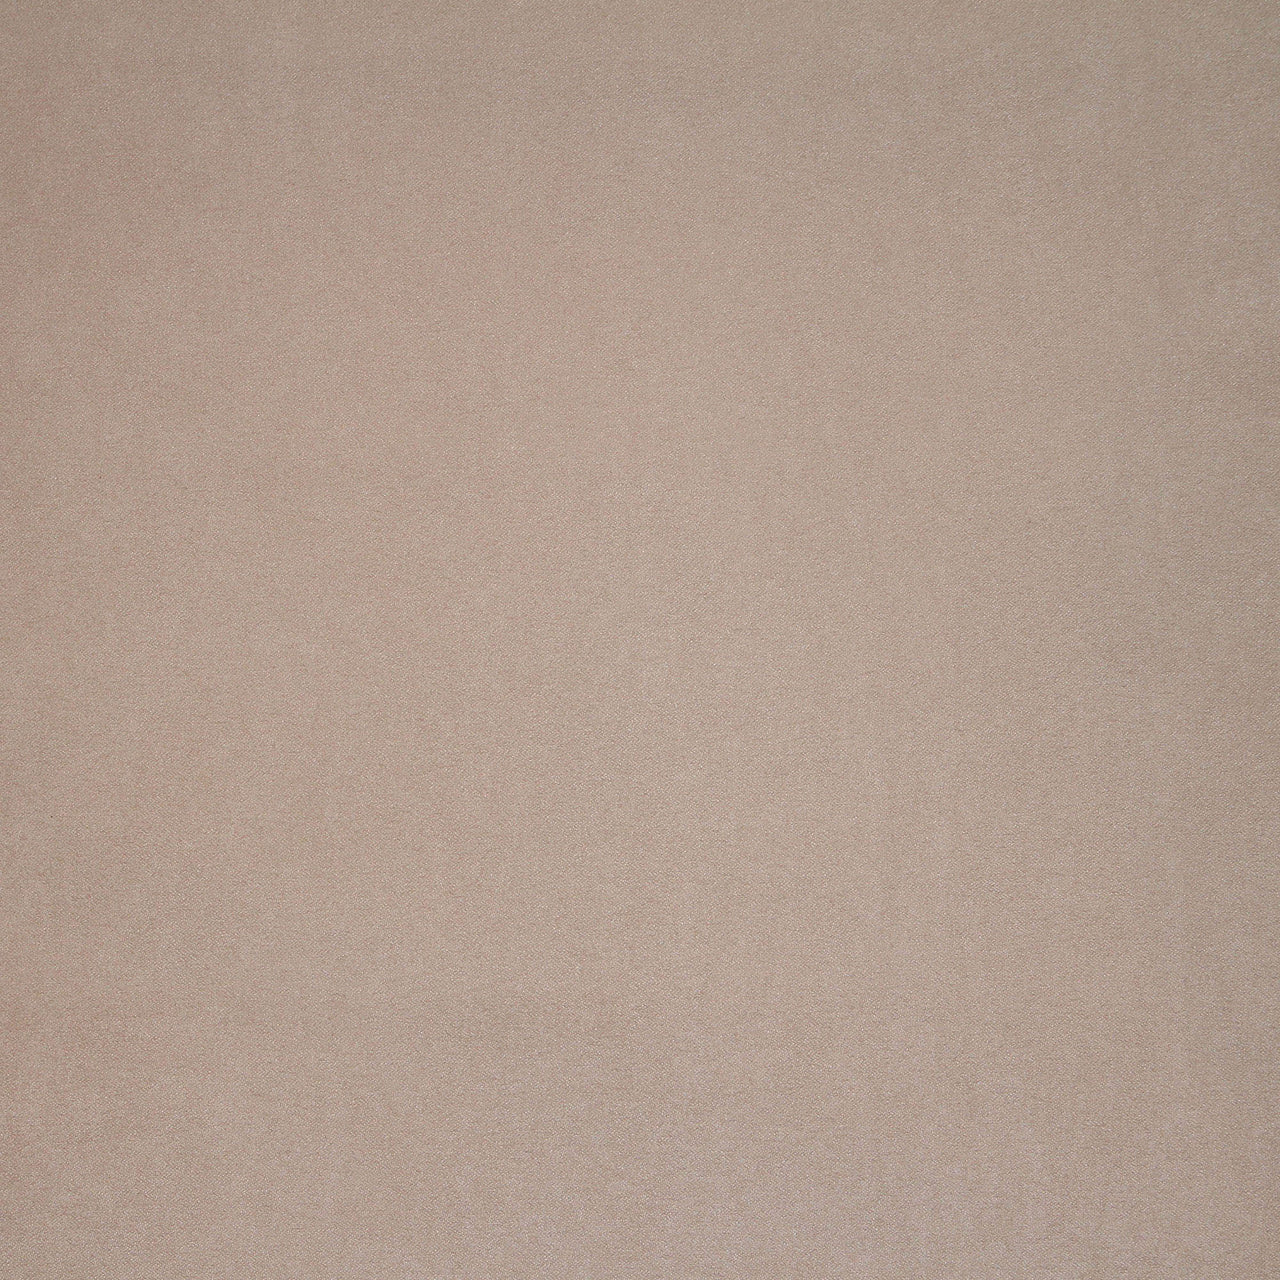 Stone Faux Suede Fabric - Superior Quality - 100% Polyester